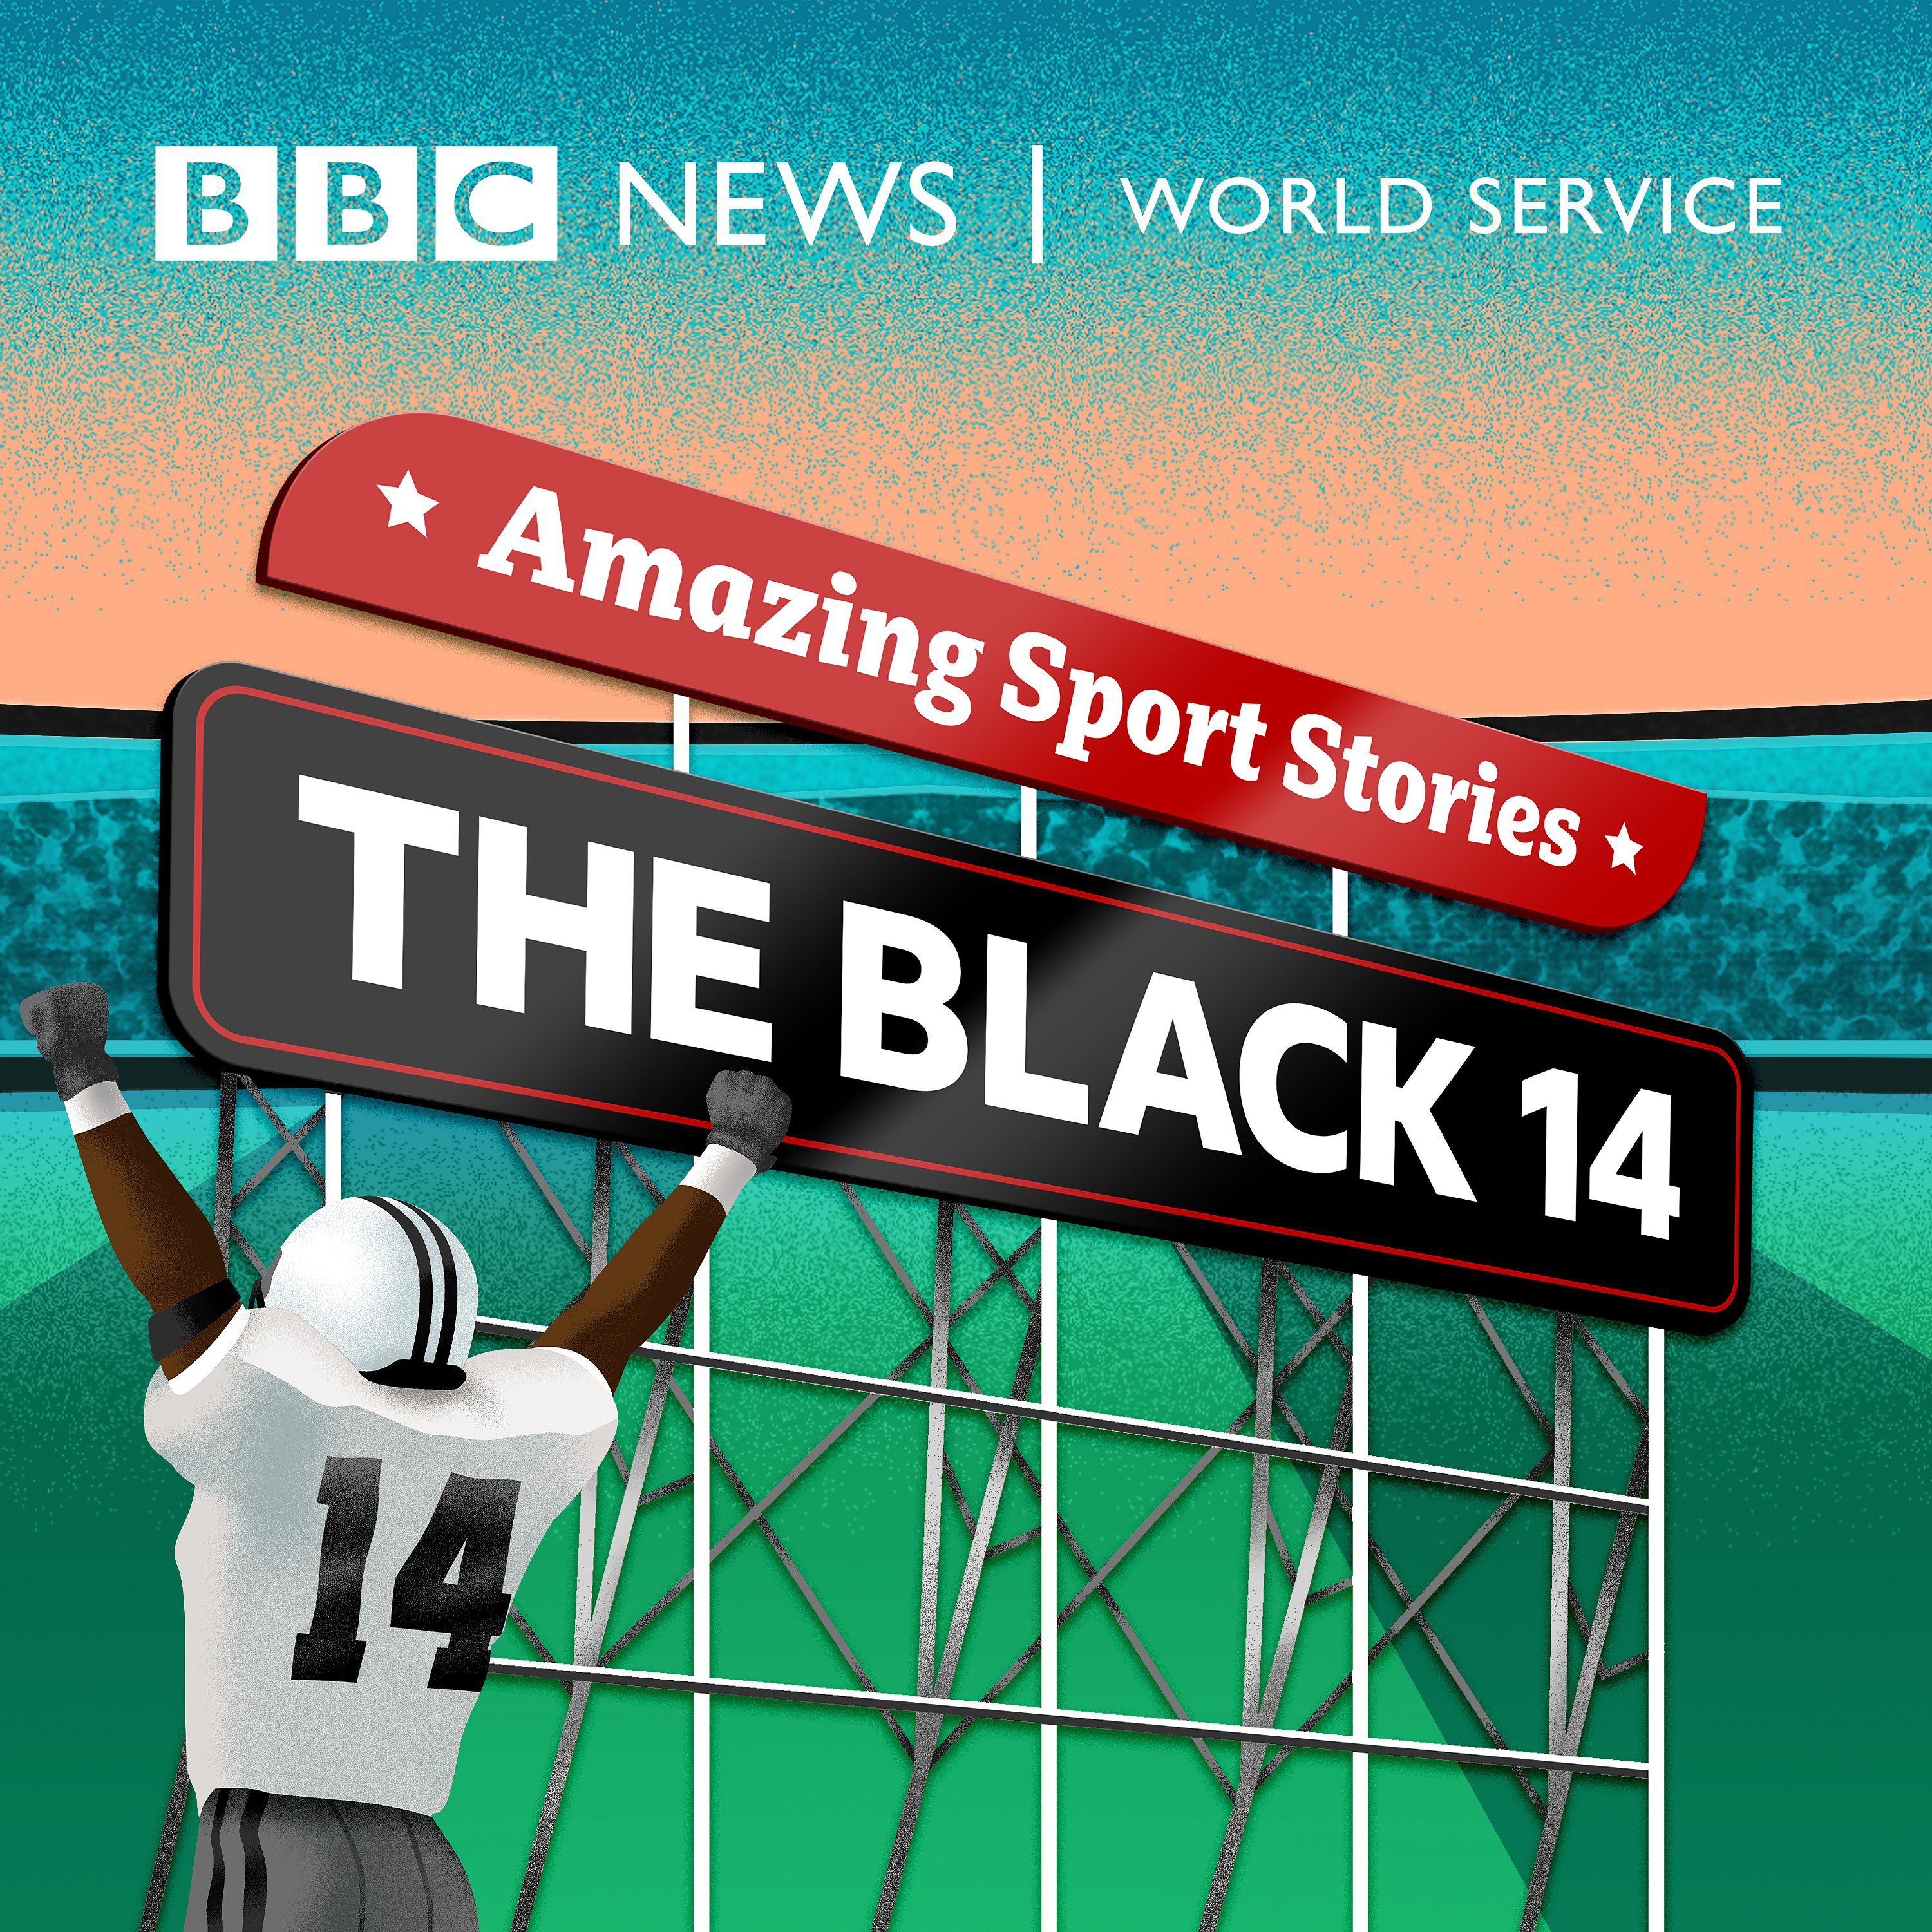 Introducing: The Black 14